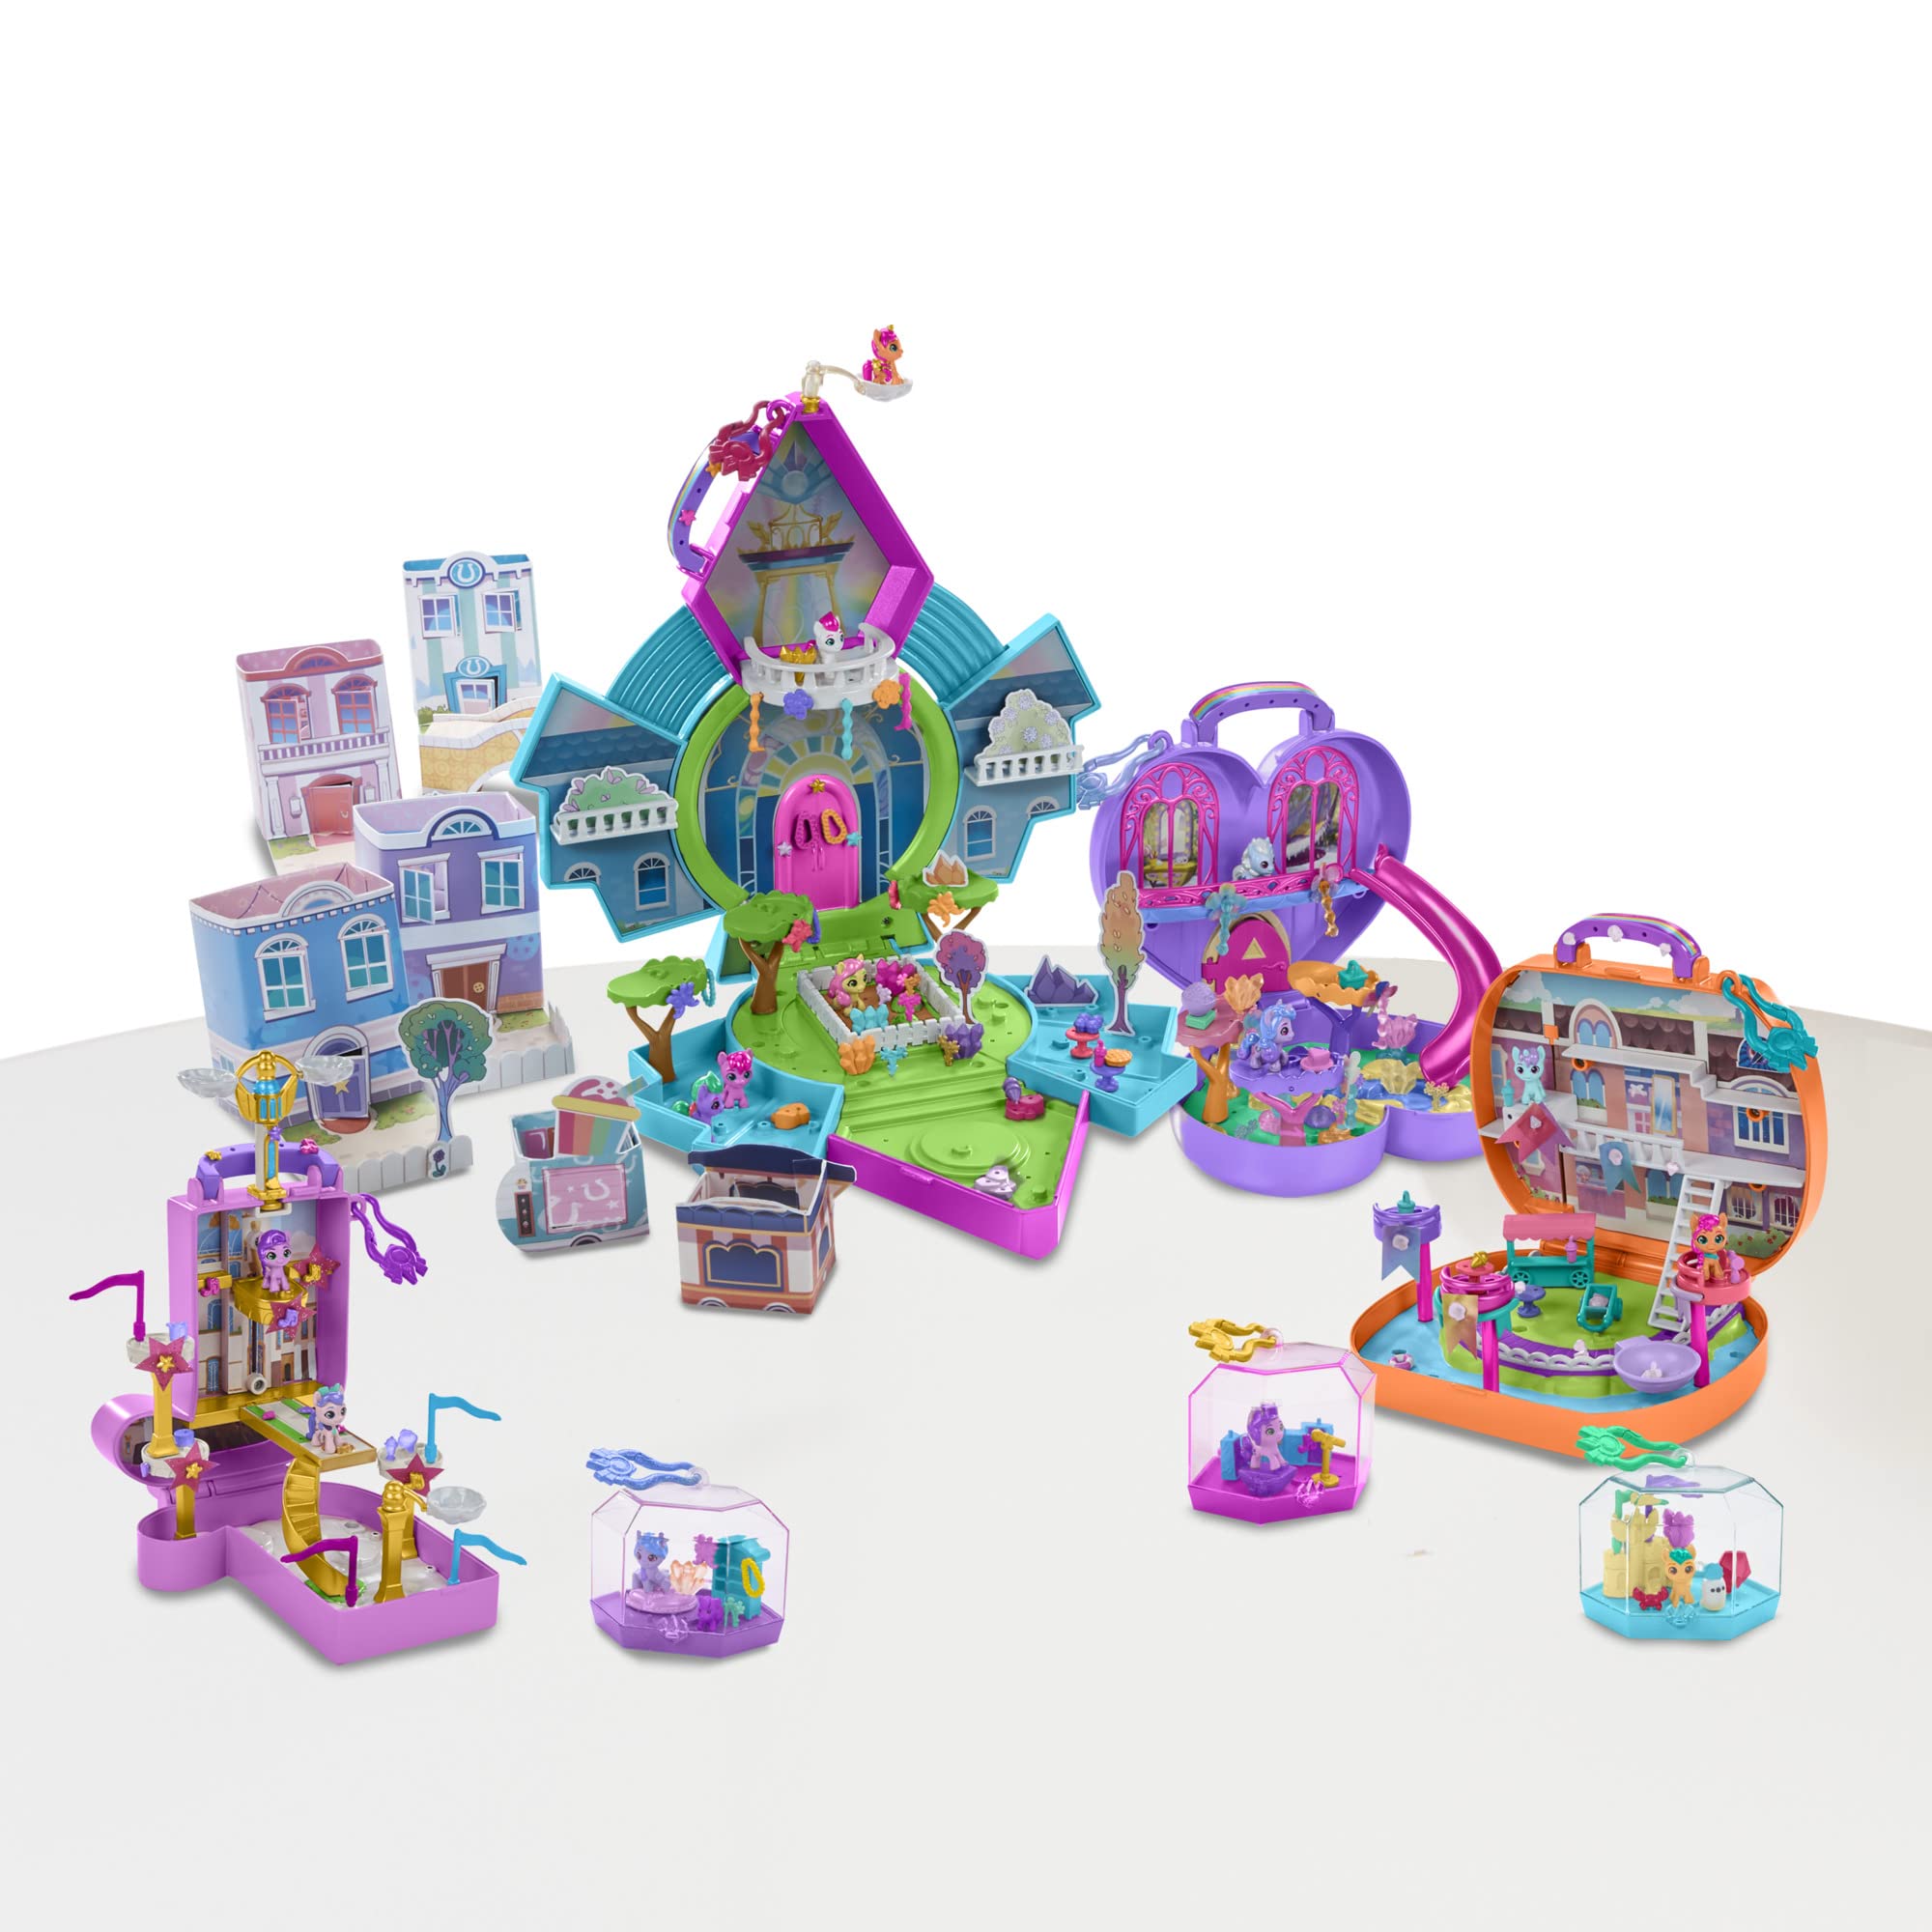 My Little Pony Hasbro Mini World Magic Epic Crystal Brighthouse Toy, Buildable Playset with 5 Collectible Figures, for Kids Ages 5 and Up